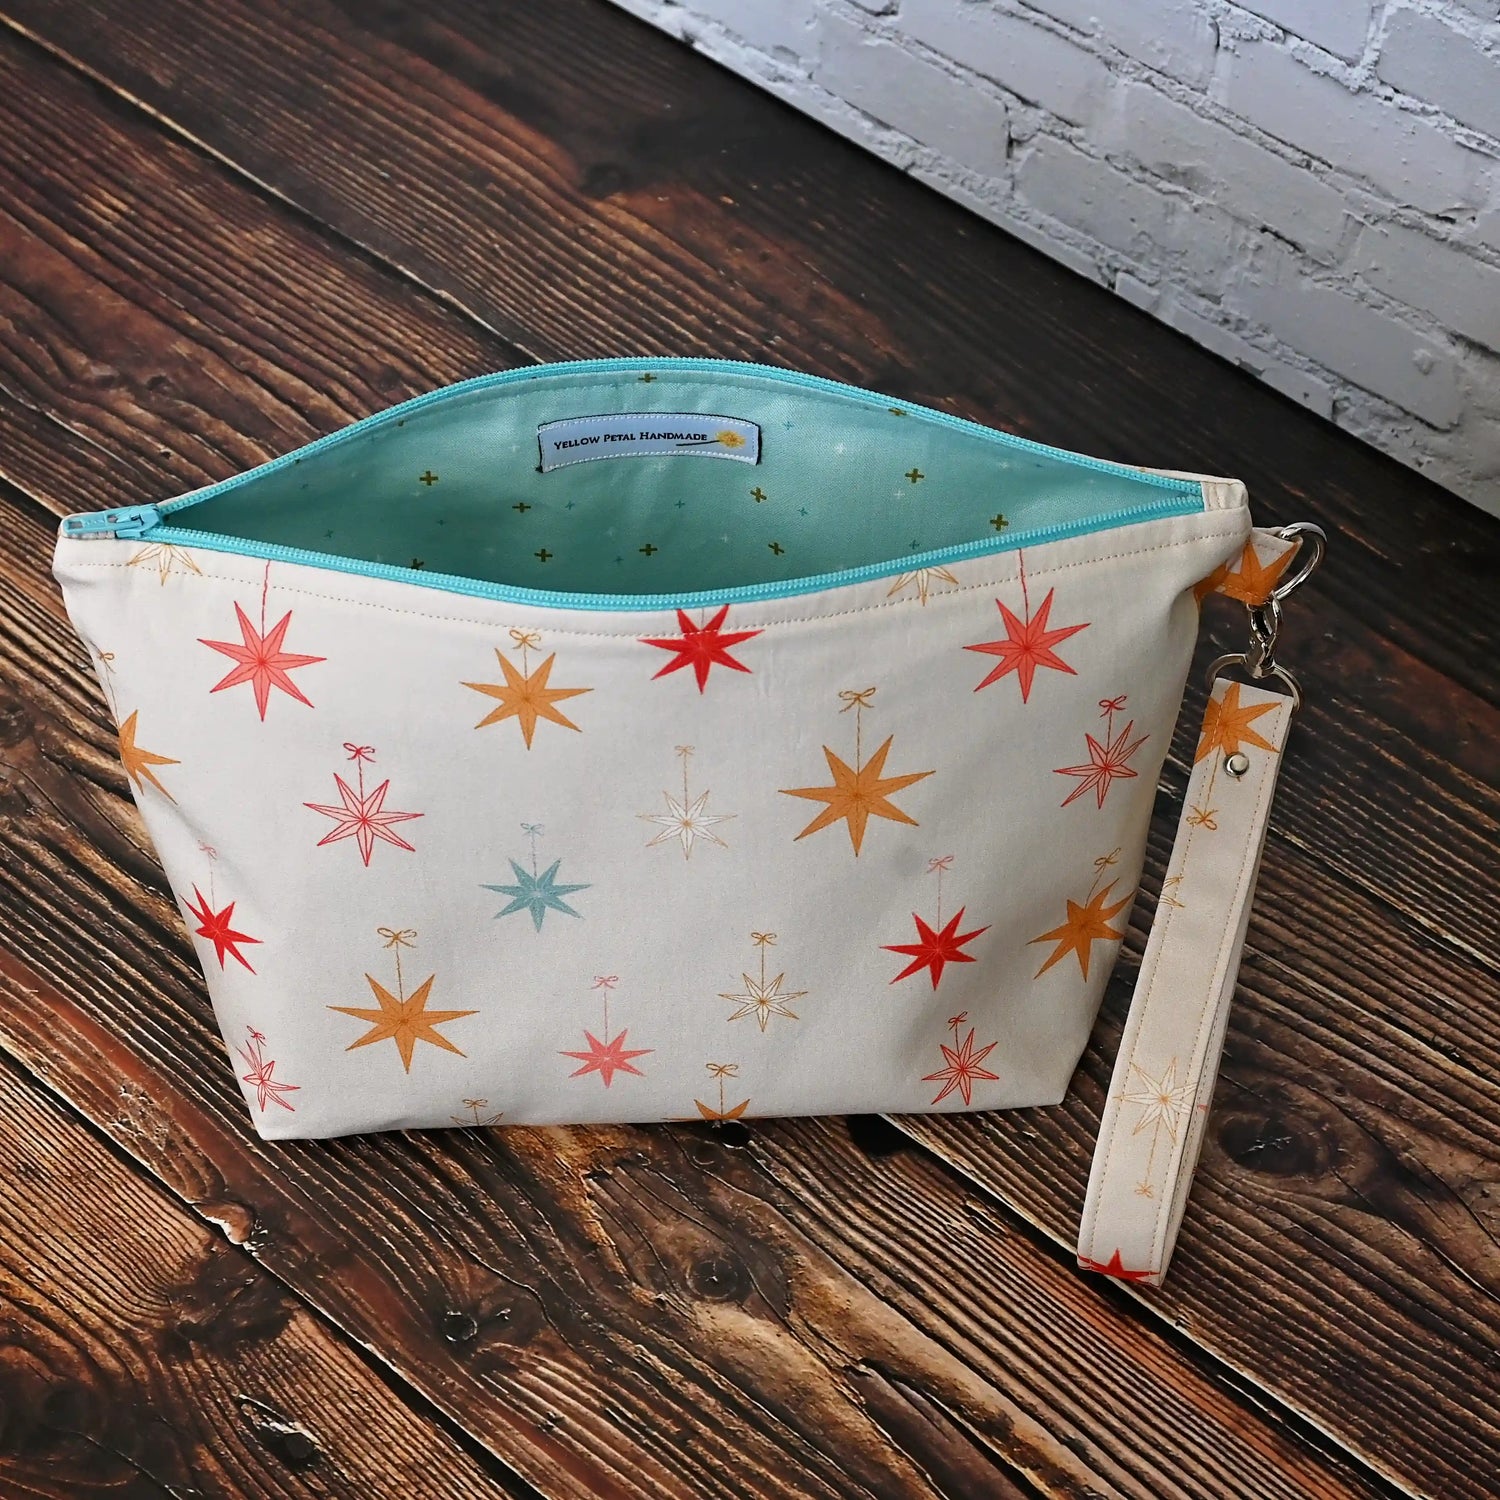 Pretty Pouch with Holiday Stars, lined in aqua fabrics.   Comes with a removable wrist Strap.  Made in Canada by Yellow Petal Handmade.